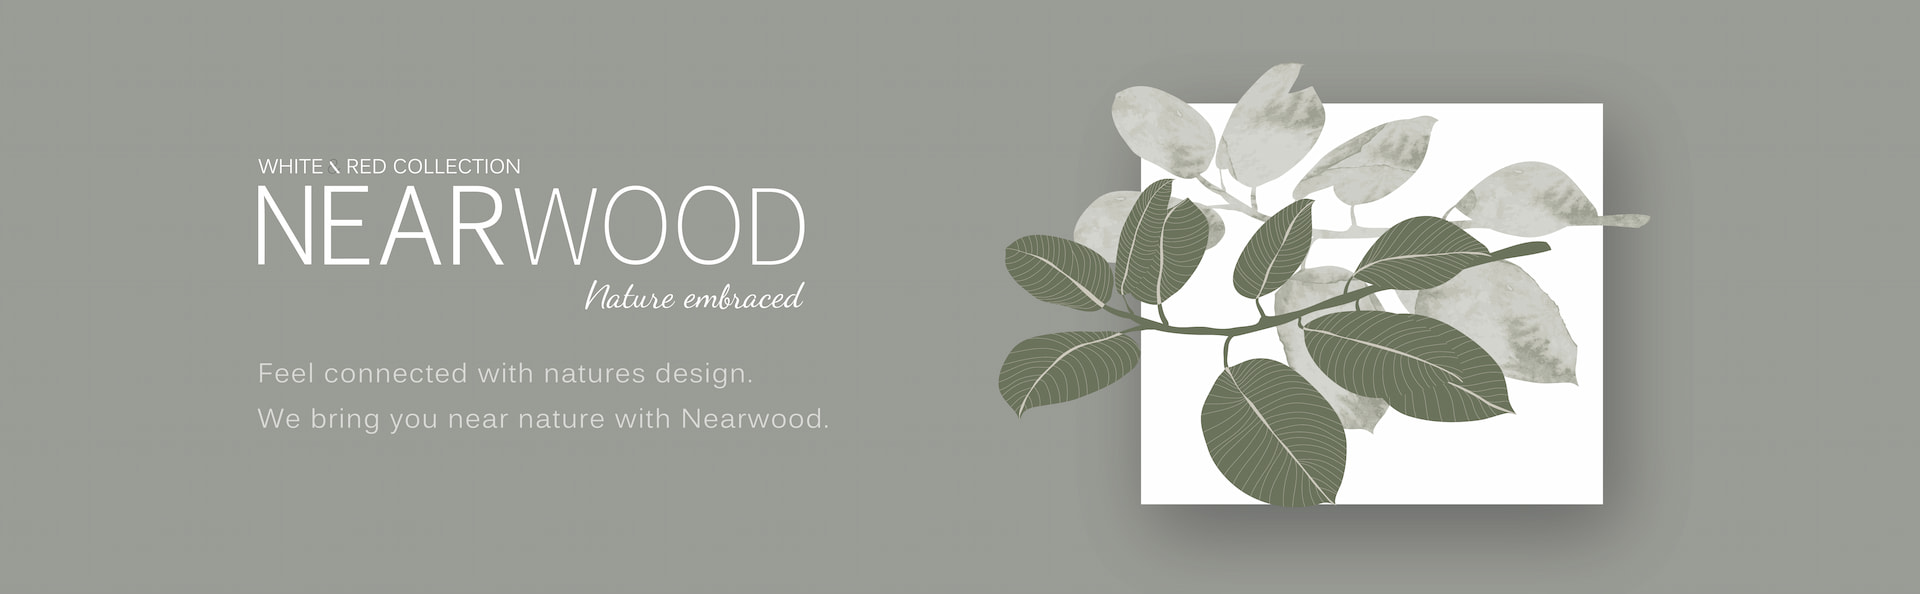 Nearwood Red & White Collection